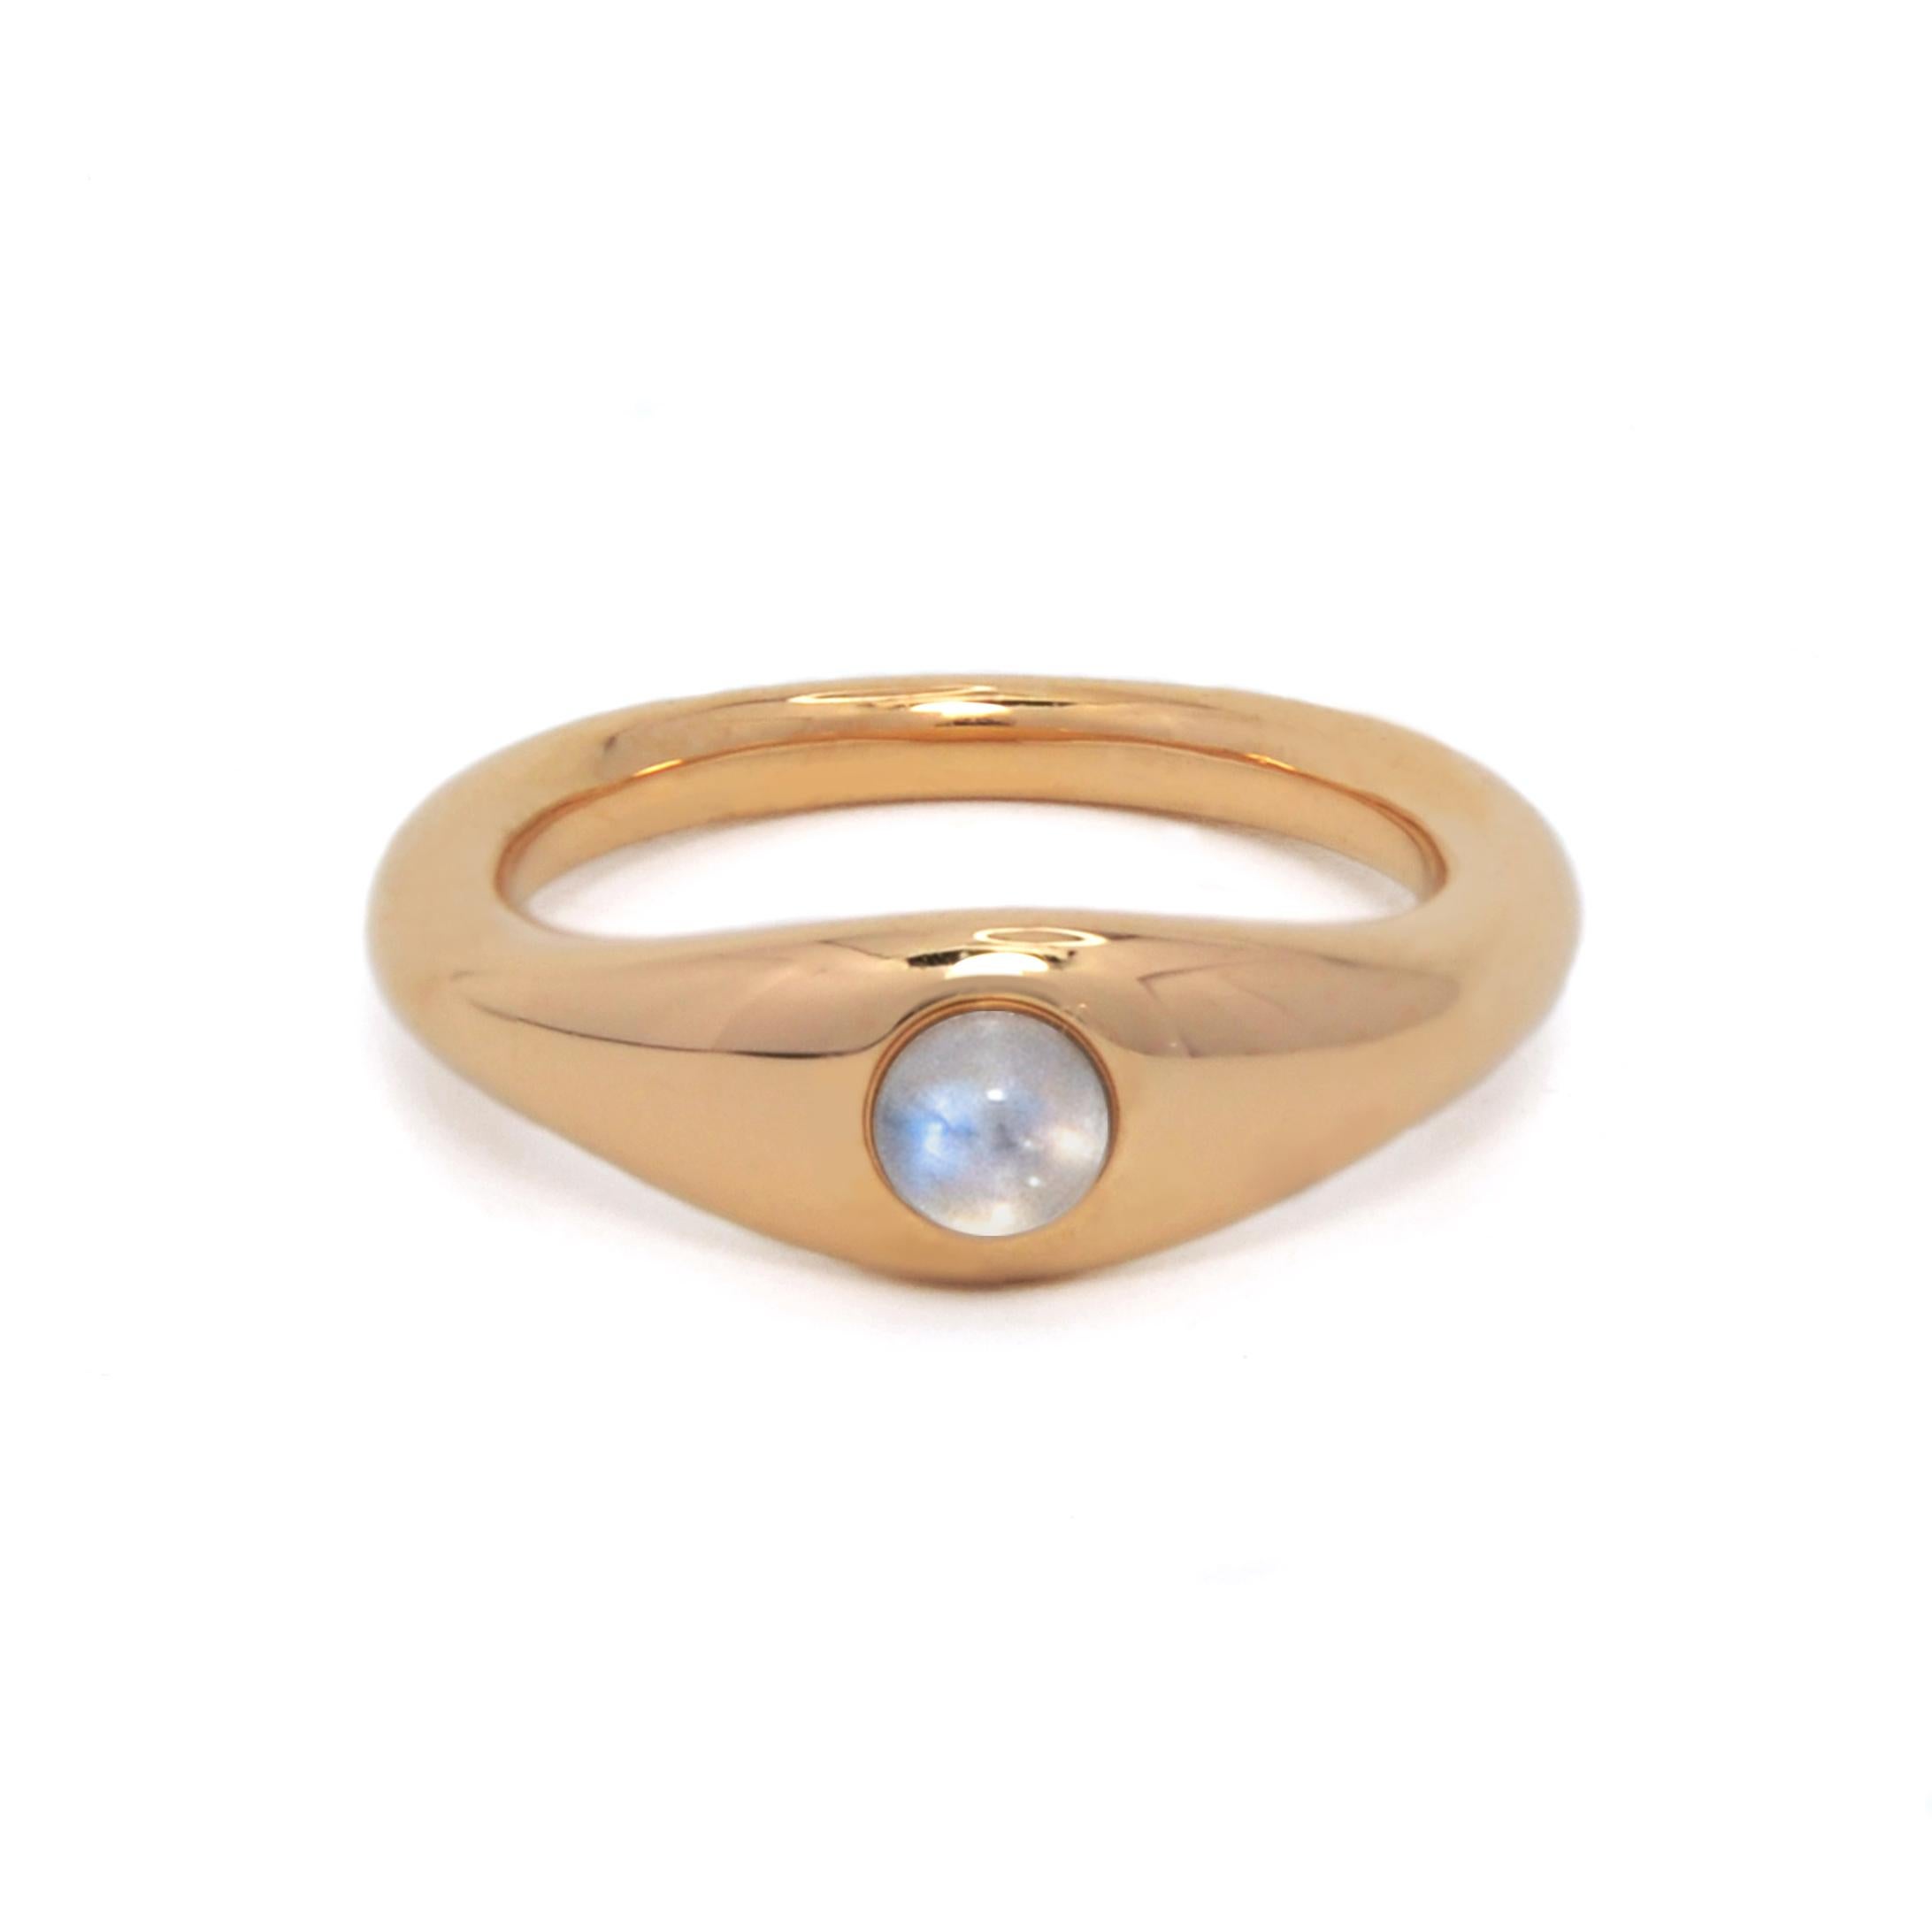 Ruth Nyc Lun Ring, 14k Yellow Gold and Moonstone Ring